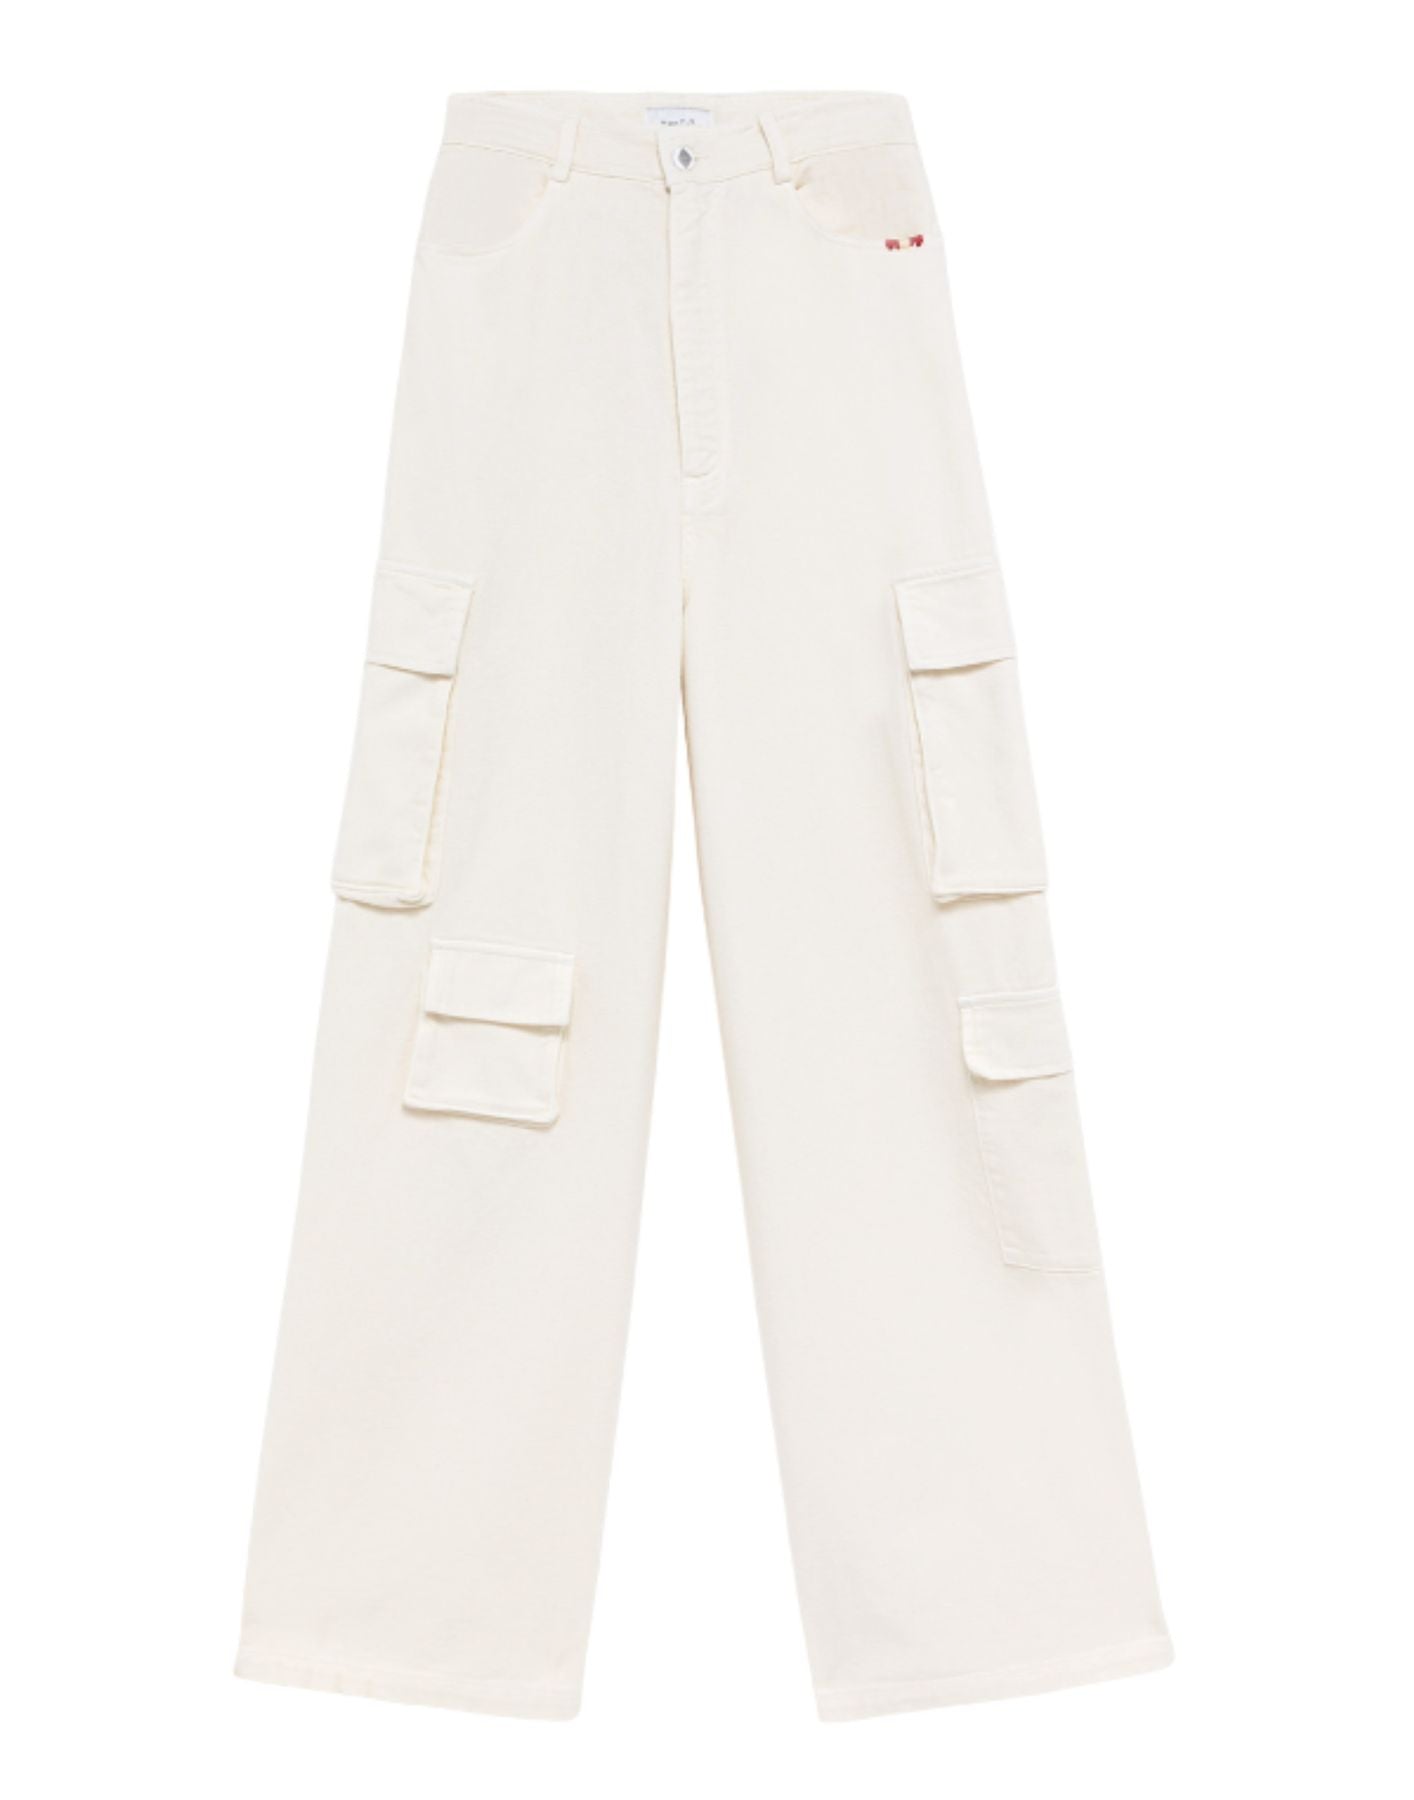 Jeans for woman AMD065P3200111 WHITE Amish